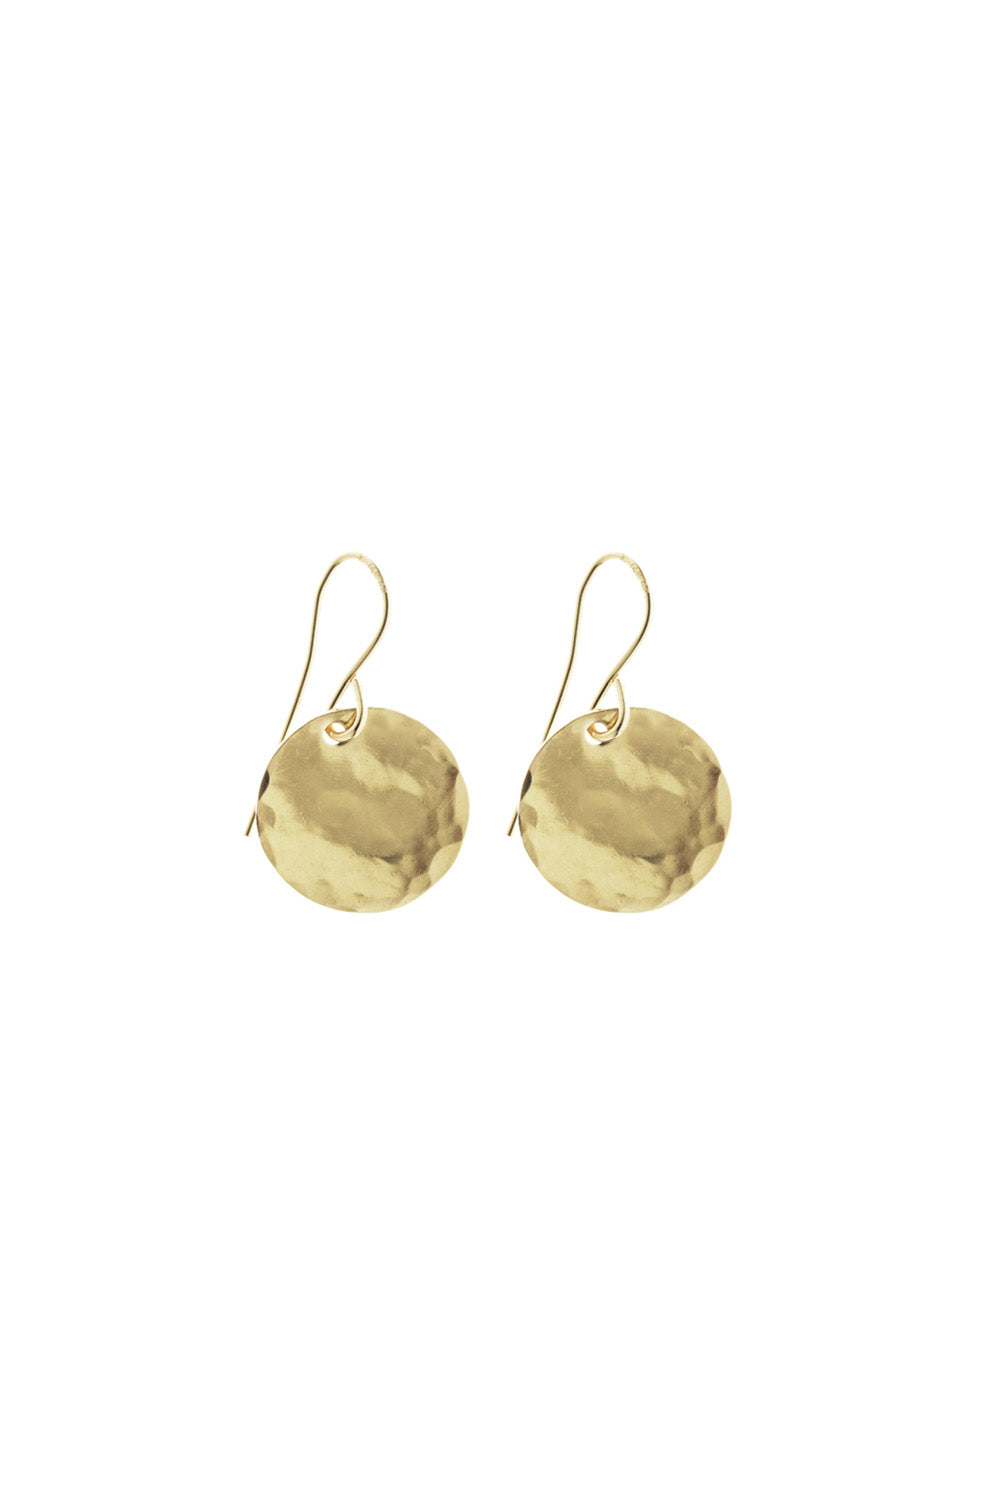 MINI HAMMERED DISK EARRING GOLD - CrateExpectations